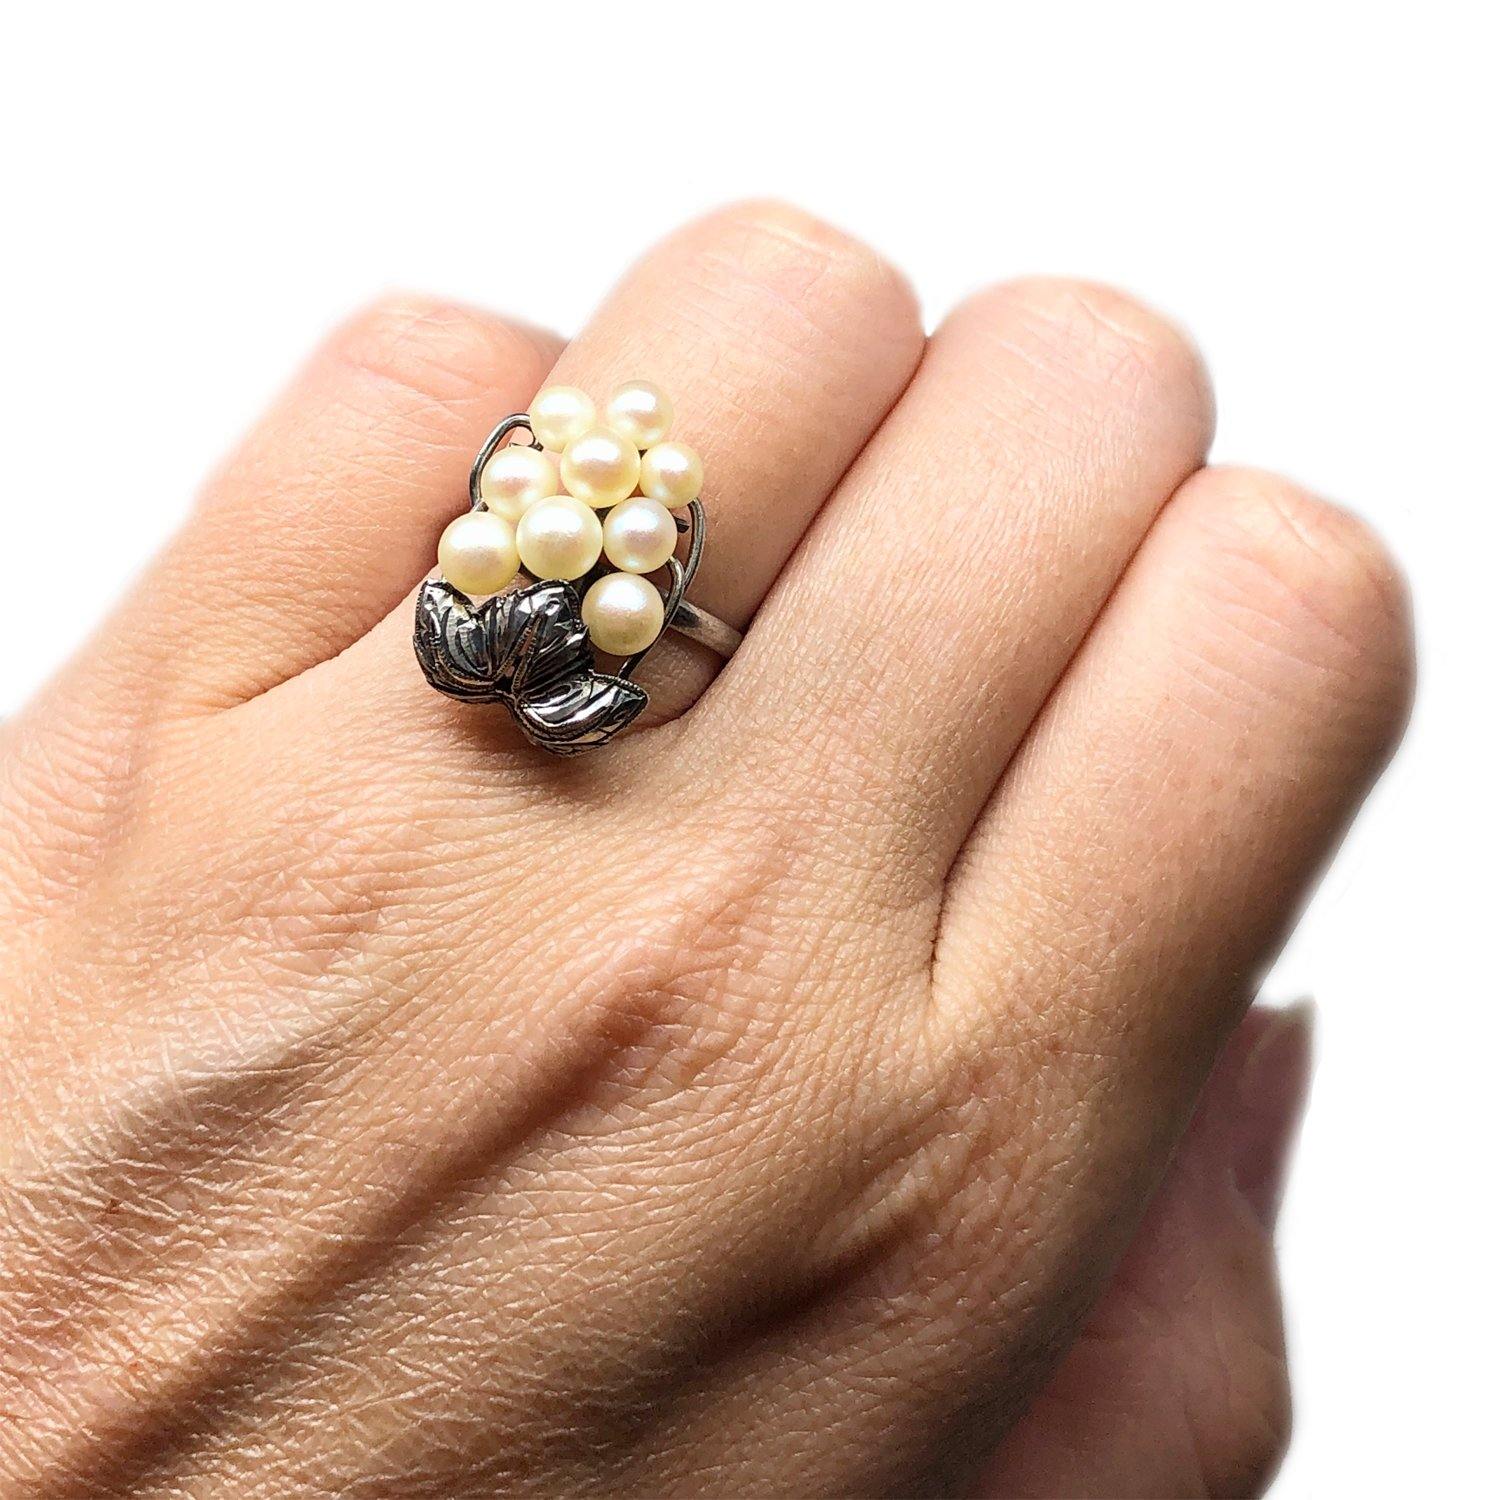 Grape Japanese Saltwater Akoya Cultured Pearl Ring- Sterling Silver Sz 7 1/4